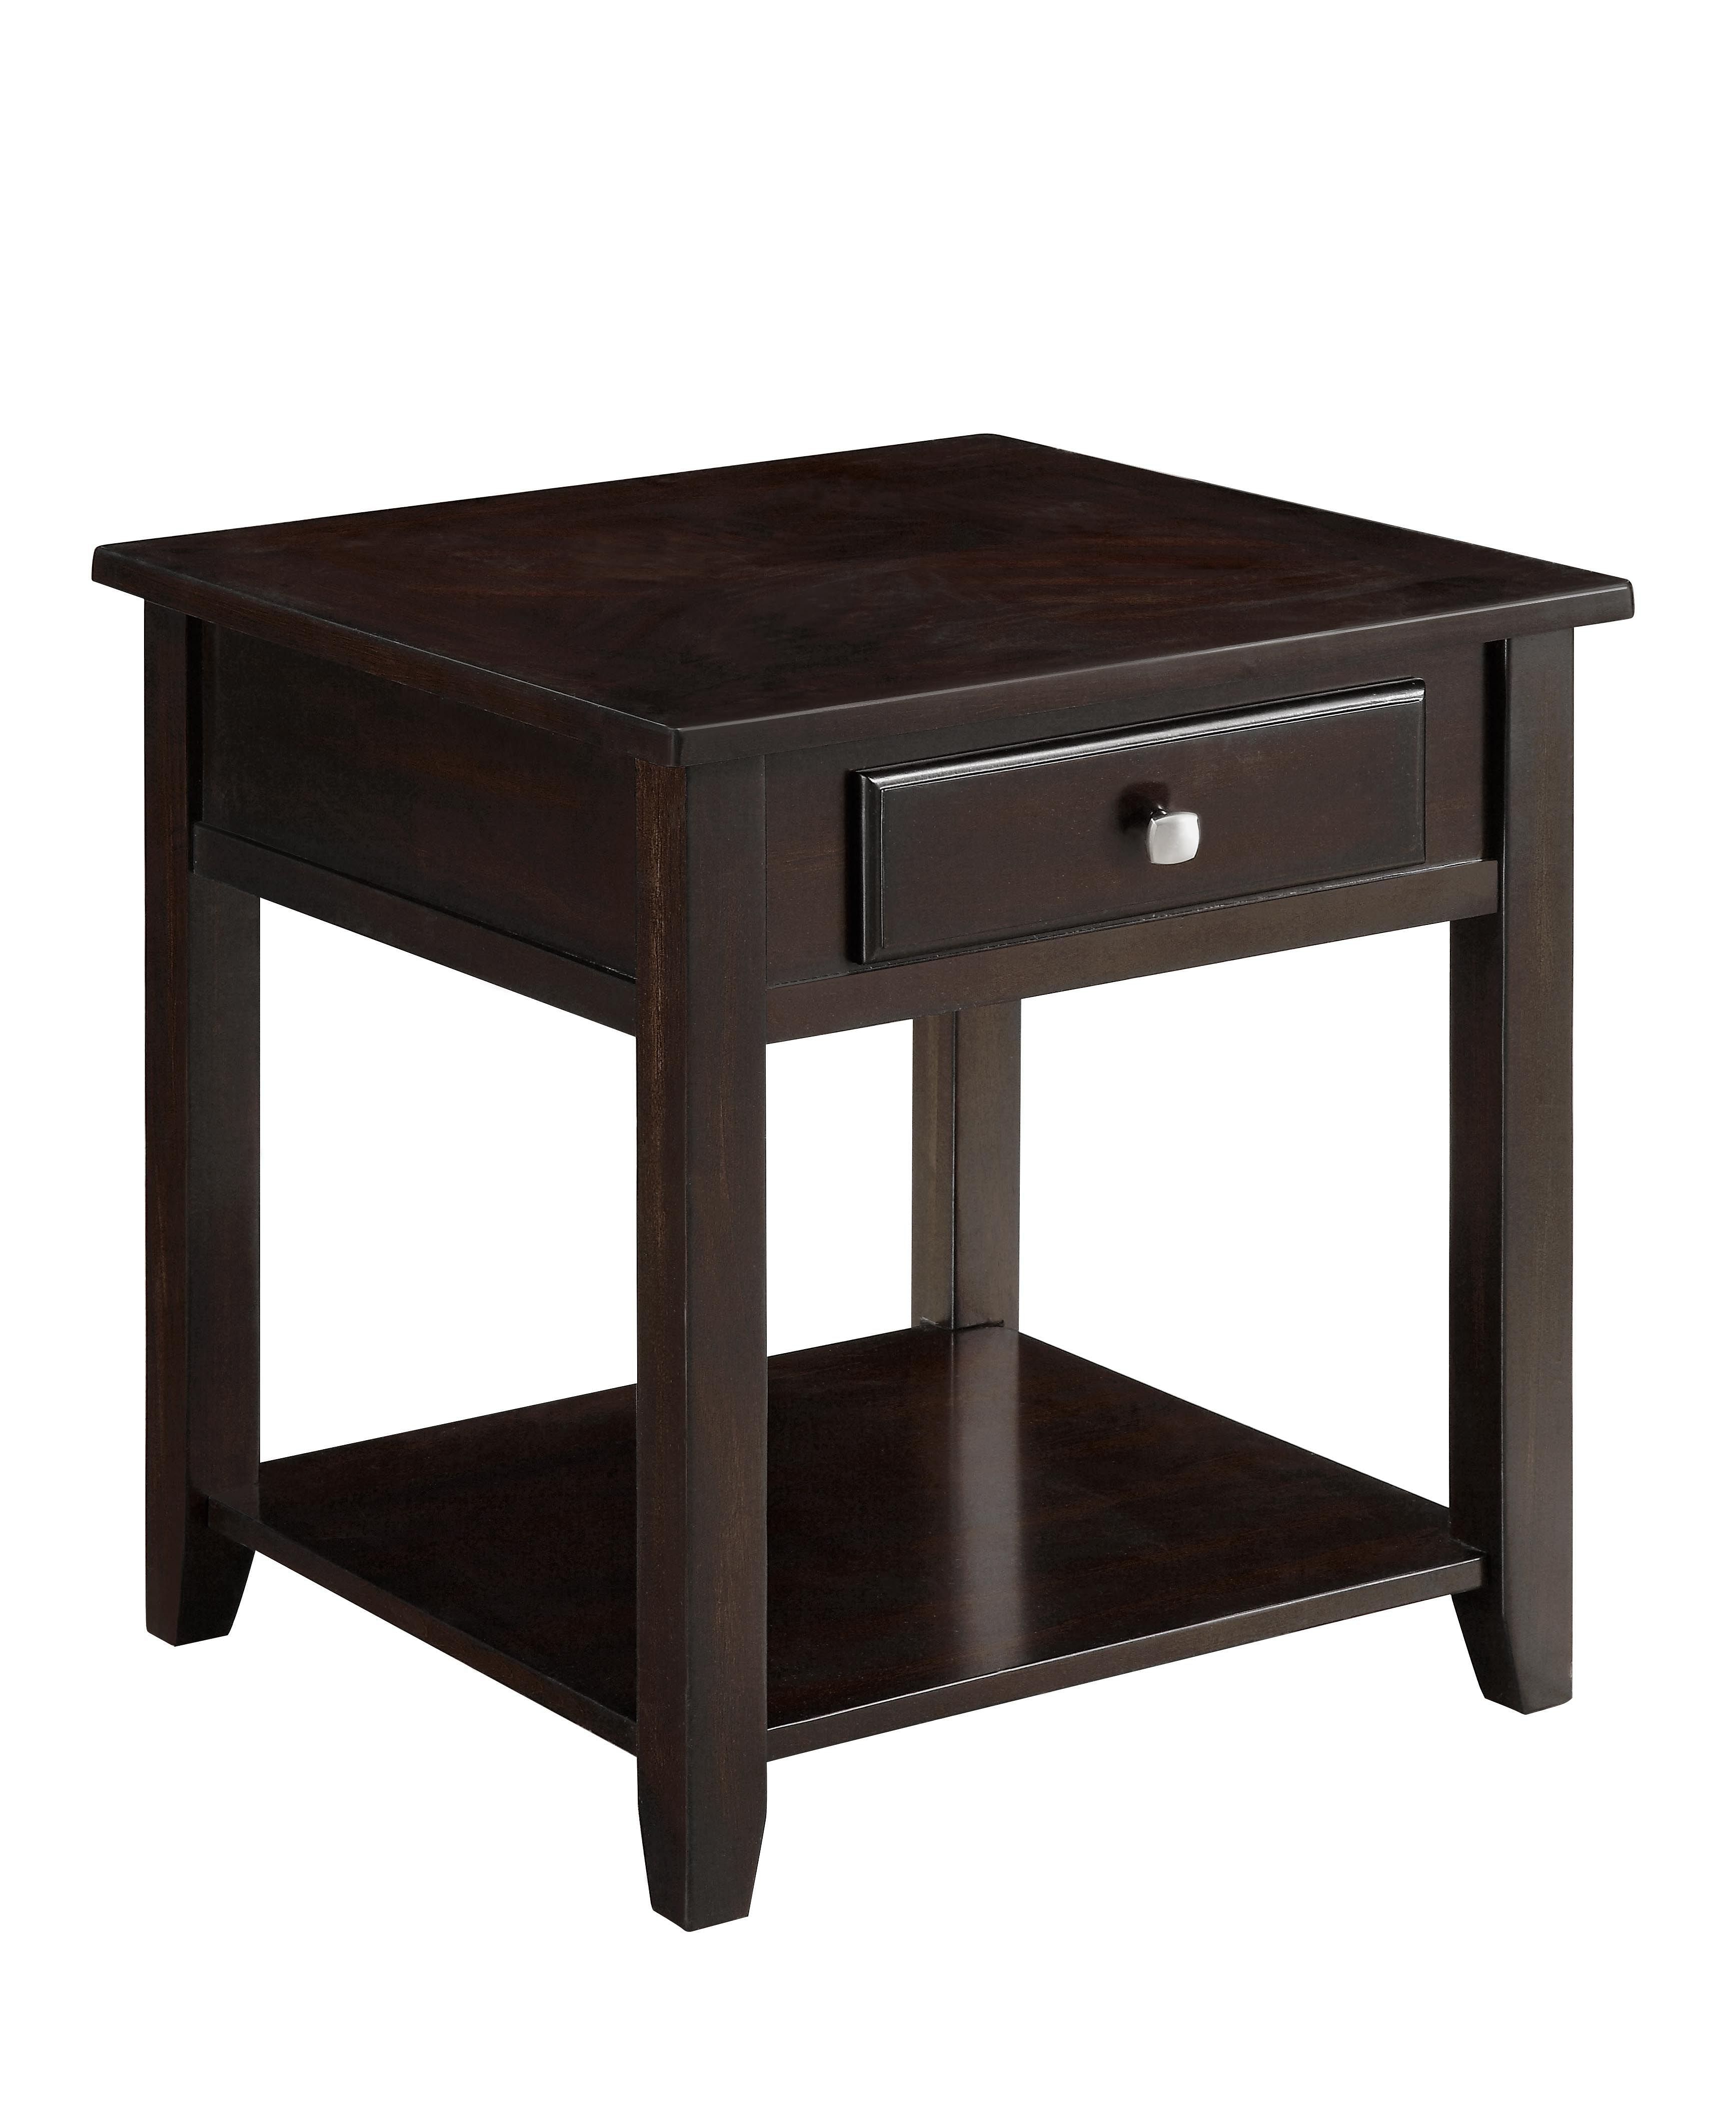 Coaster Living Room End Table 721037